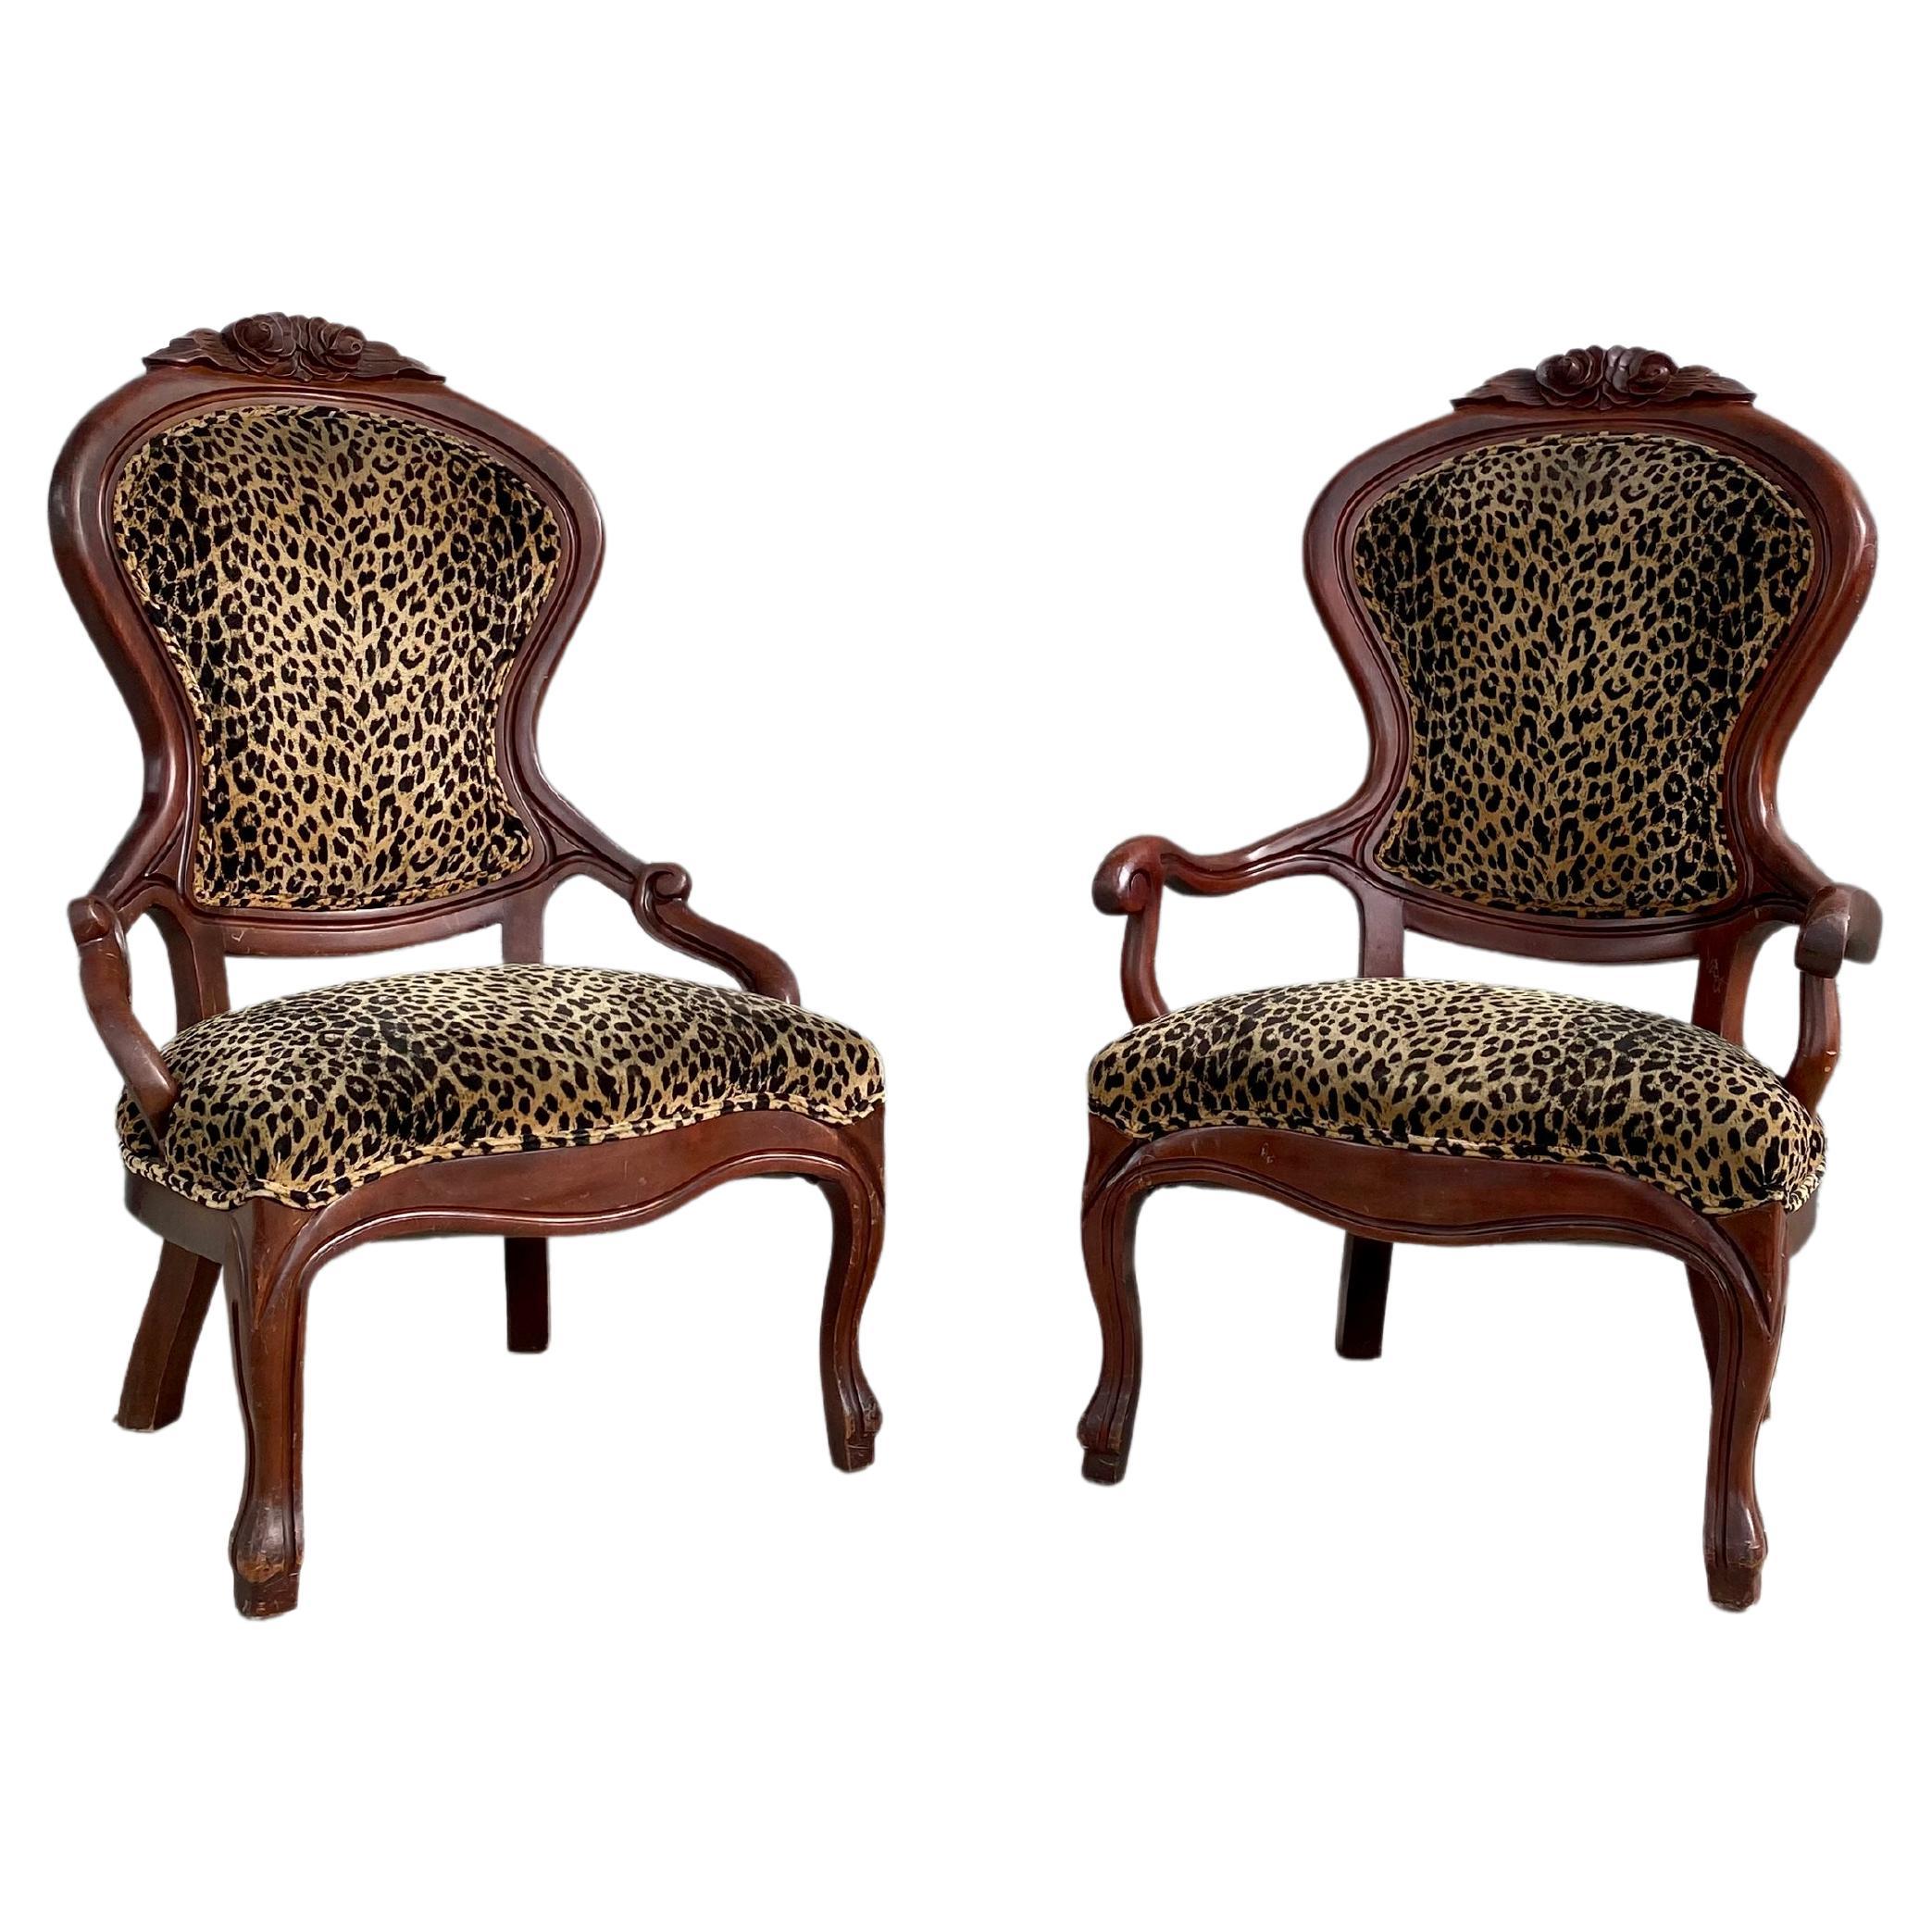 1940s Carved Floral Wood Leopard Scalamabdre Velvet Arm Chairs, Set of 2 For Sale